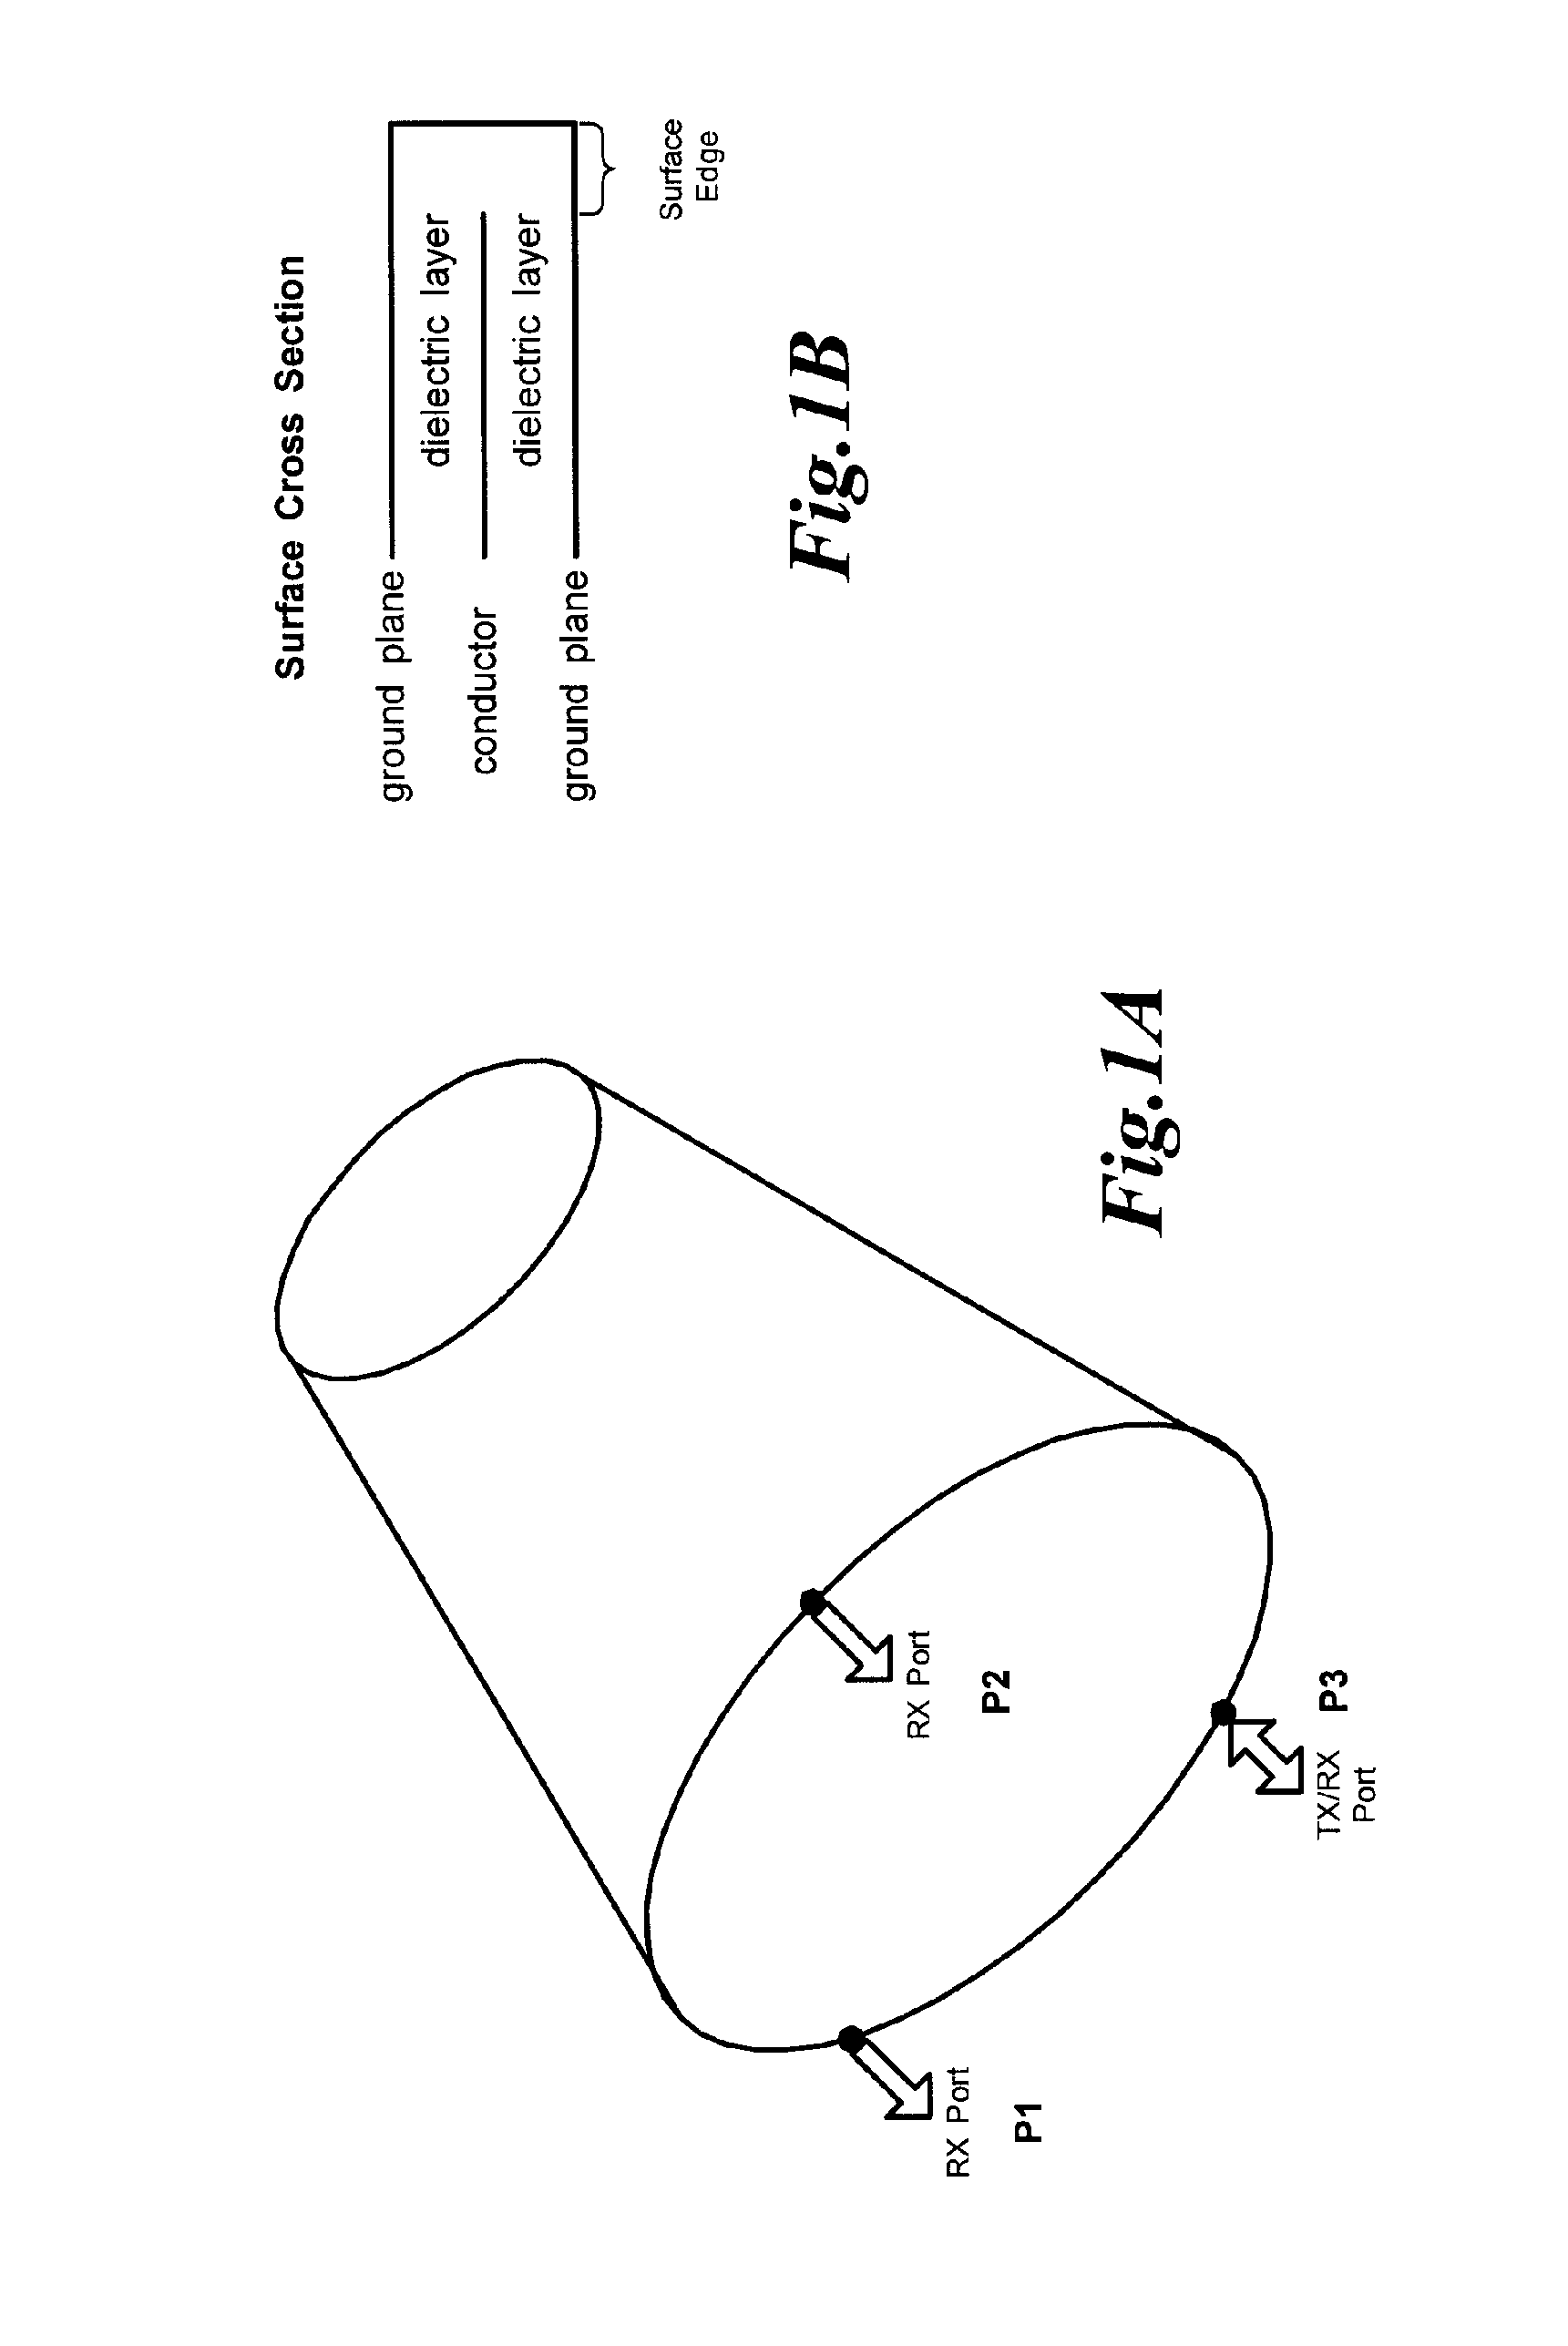 Hypervelocity impact detection method and system for determining impact location in a detection surface